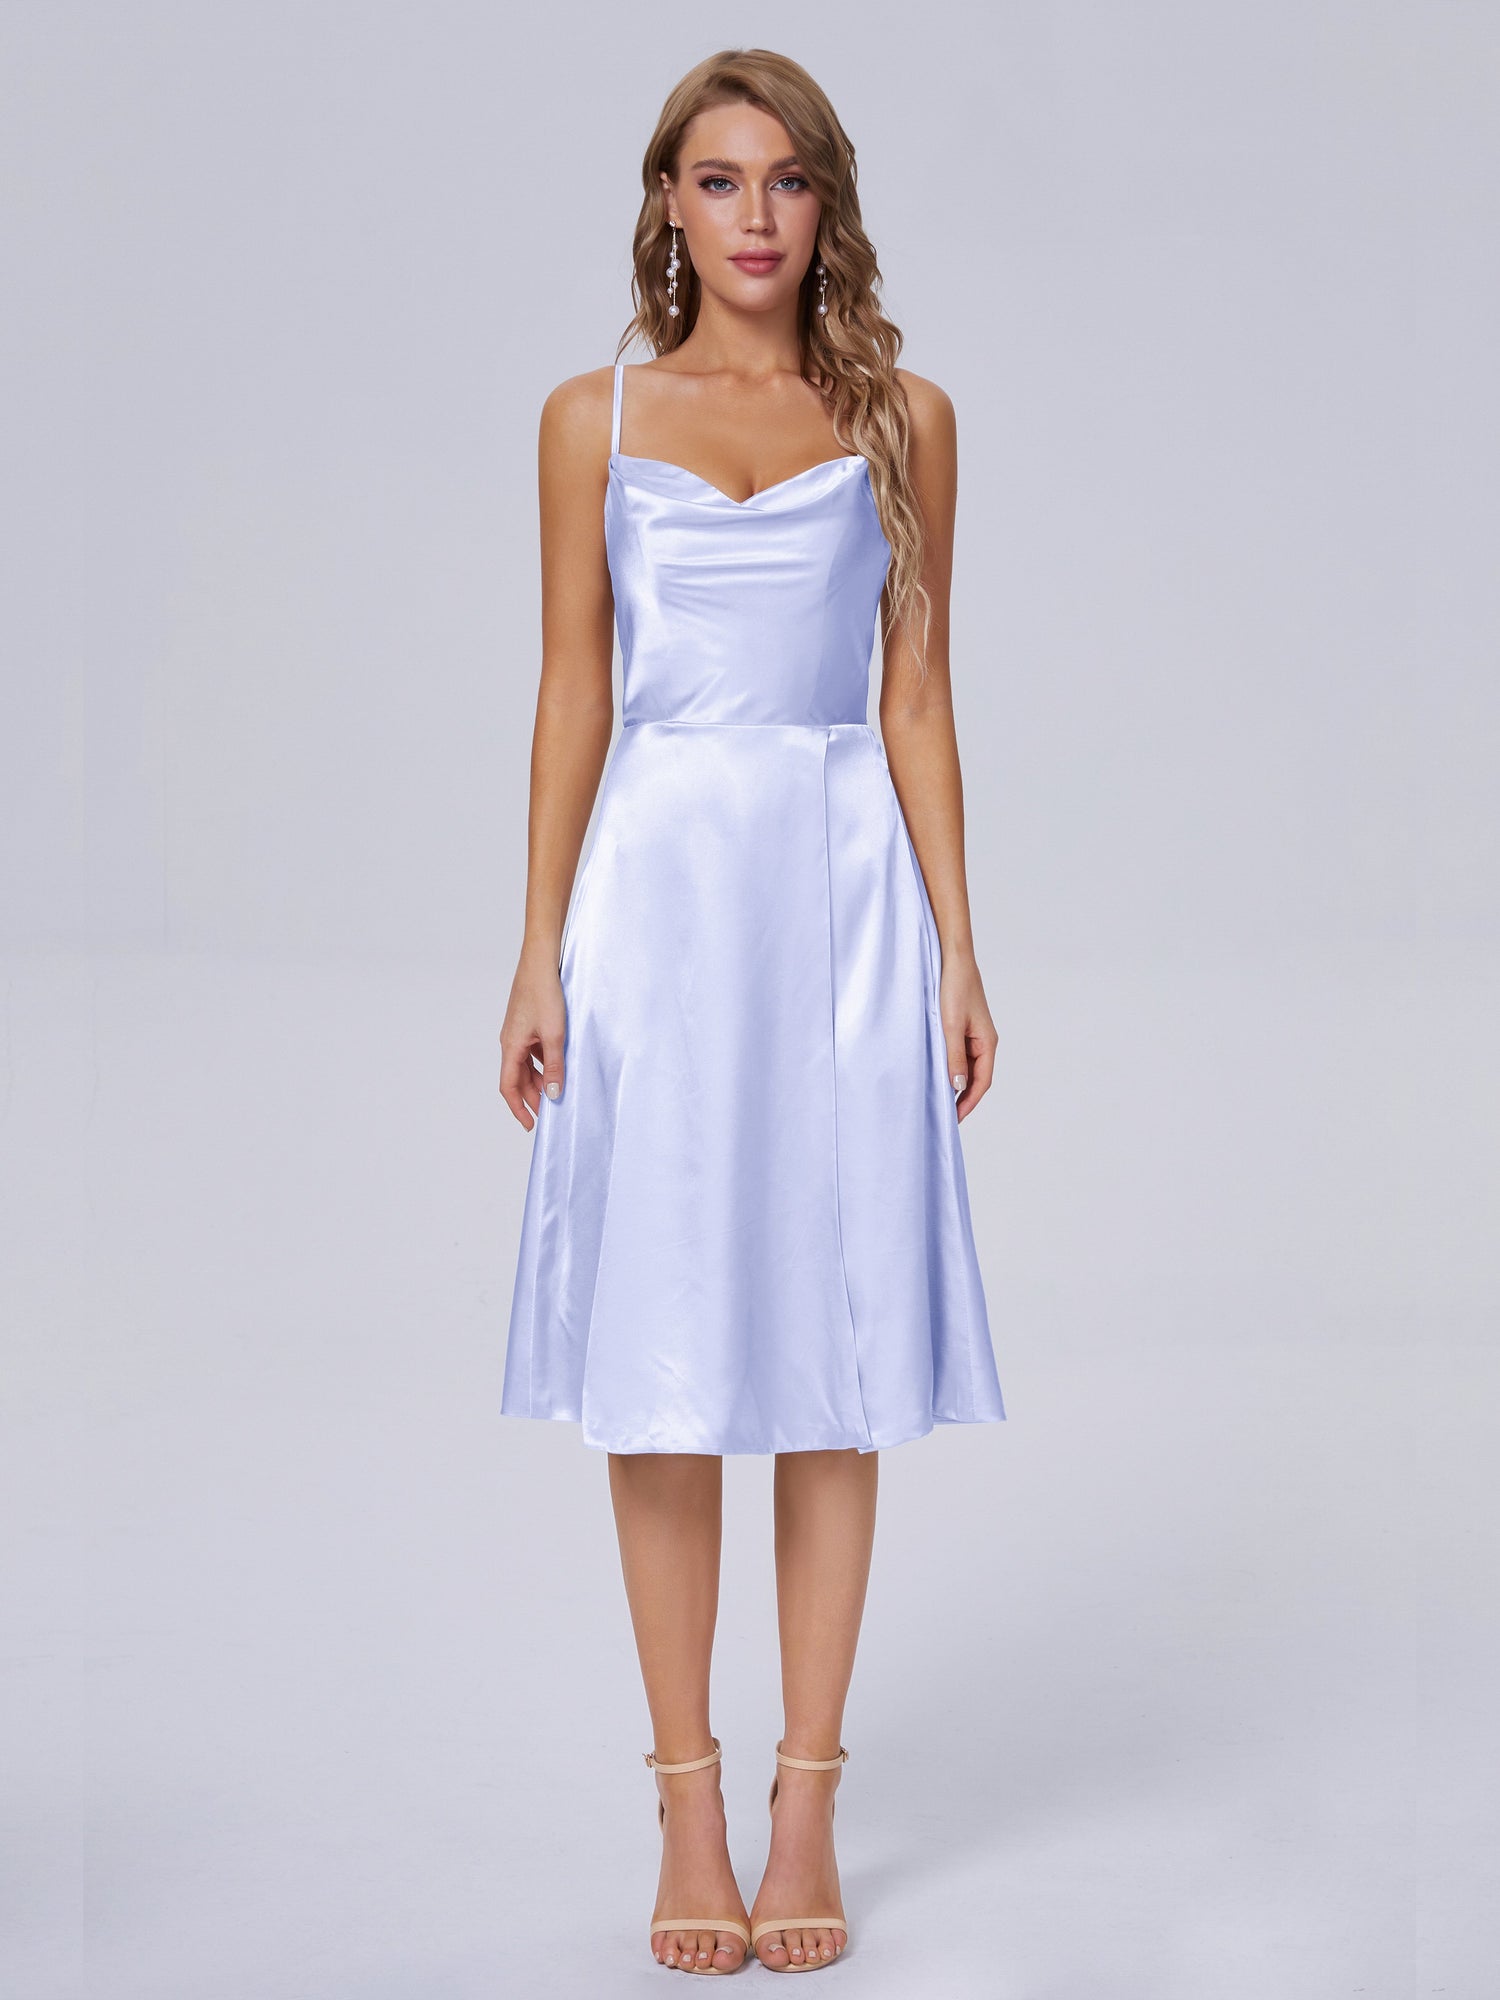 This is the Dreamy Satin Looking Bridesmaid You Are Dress For